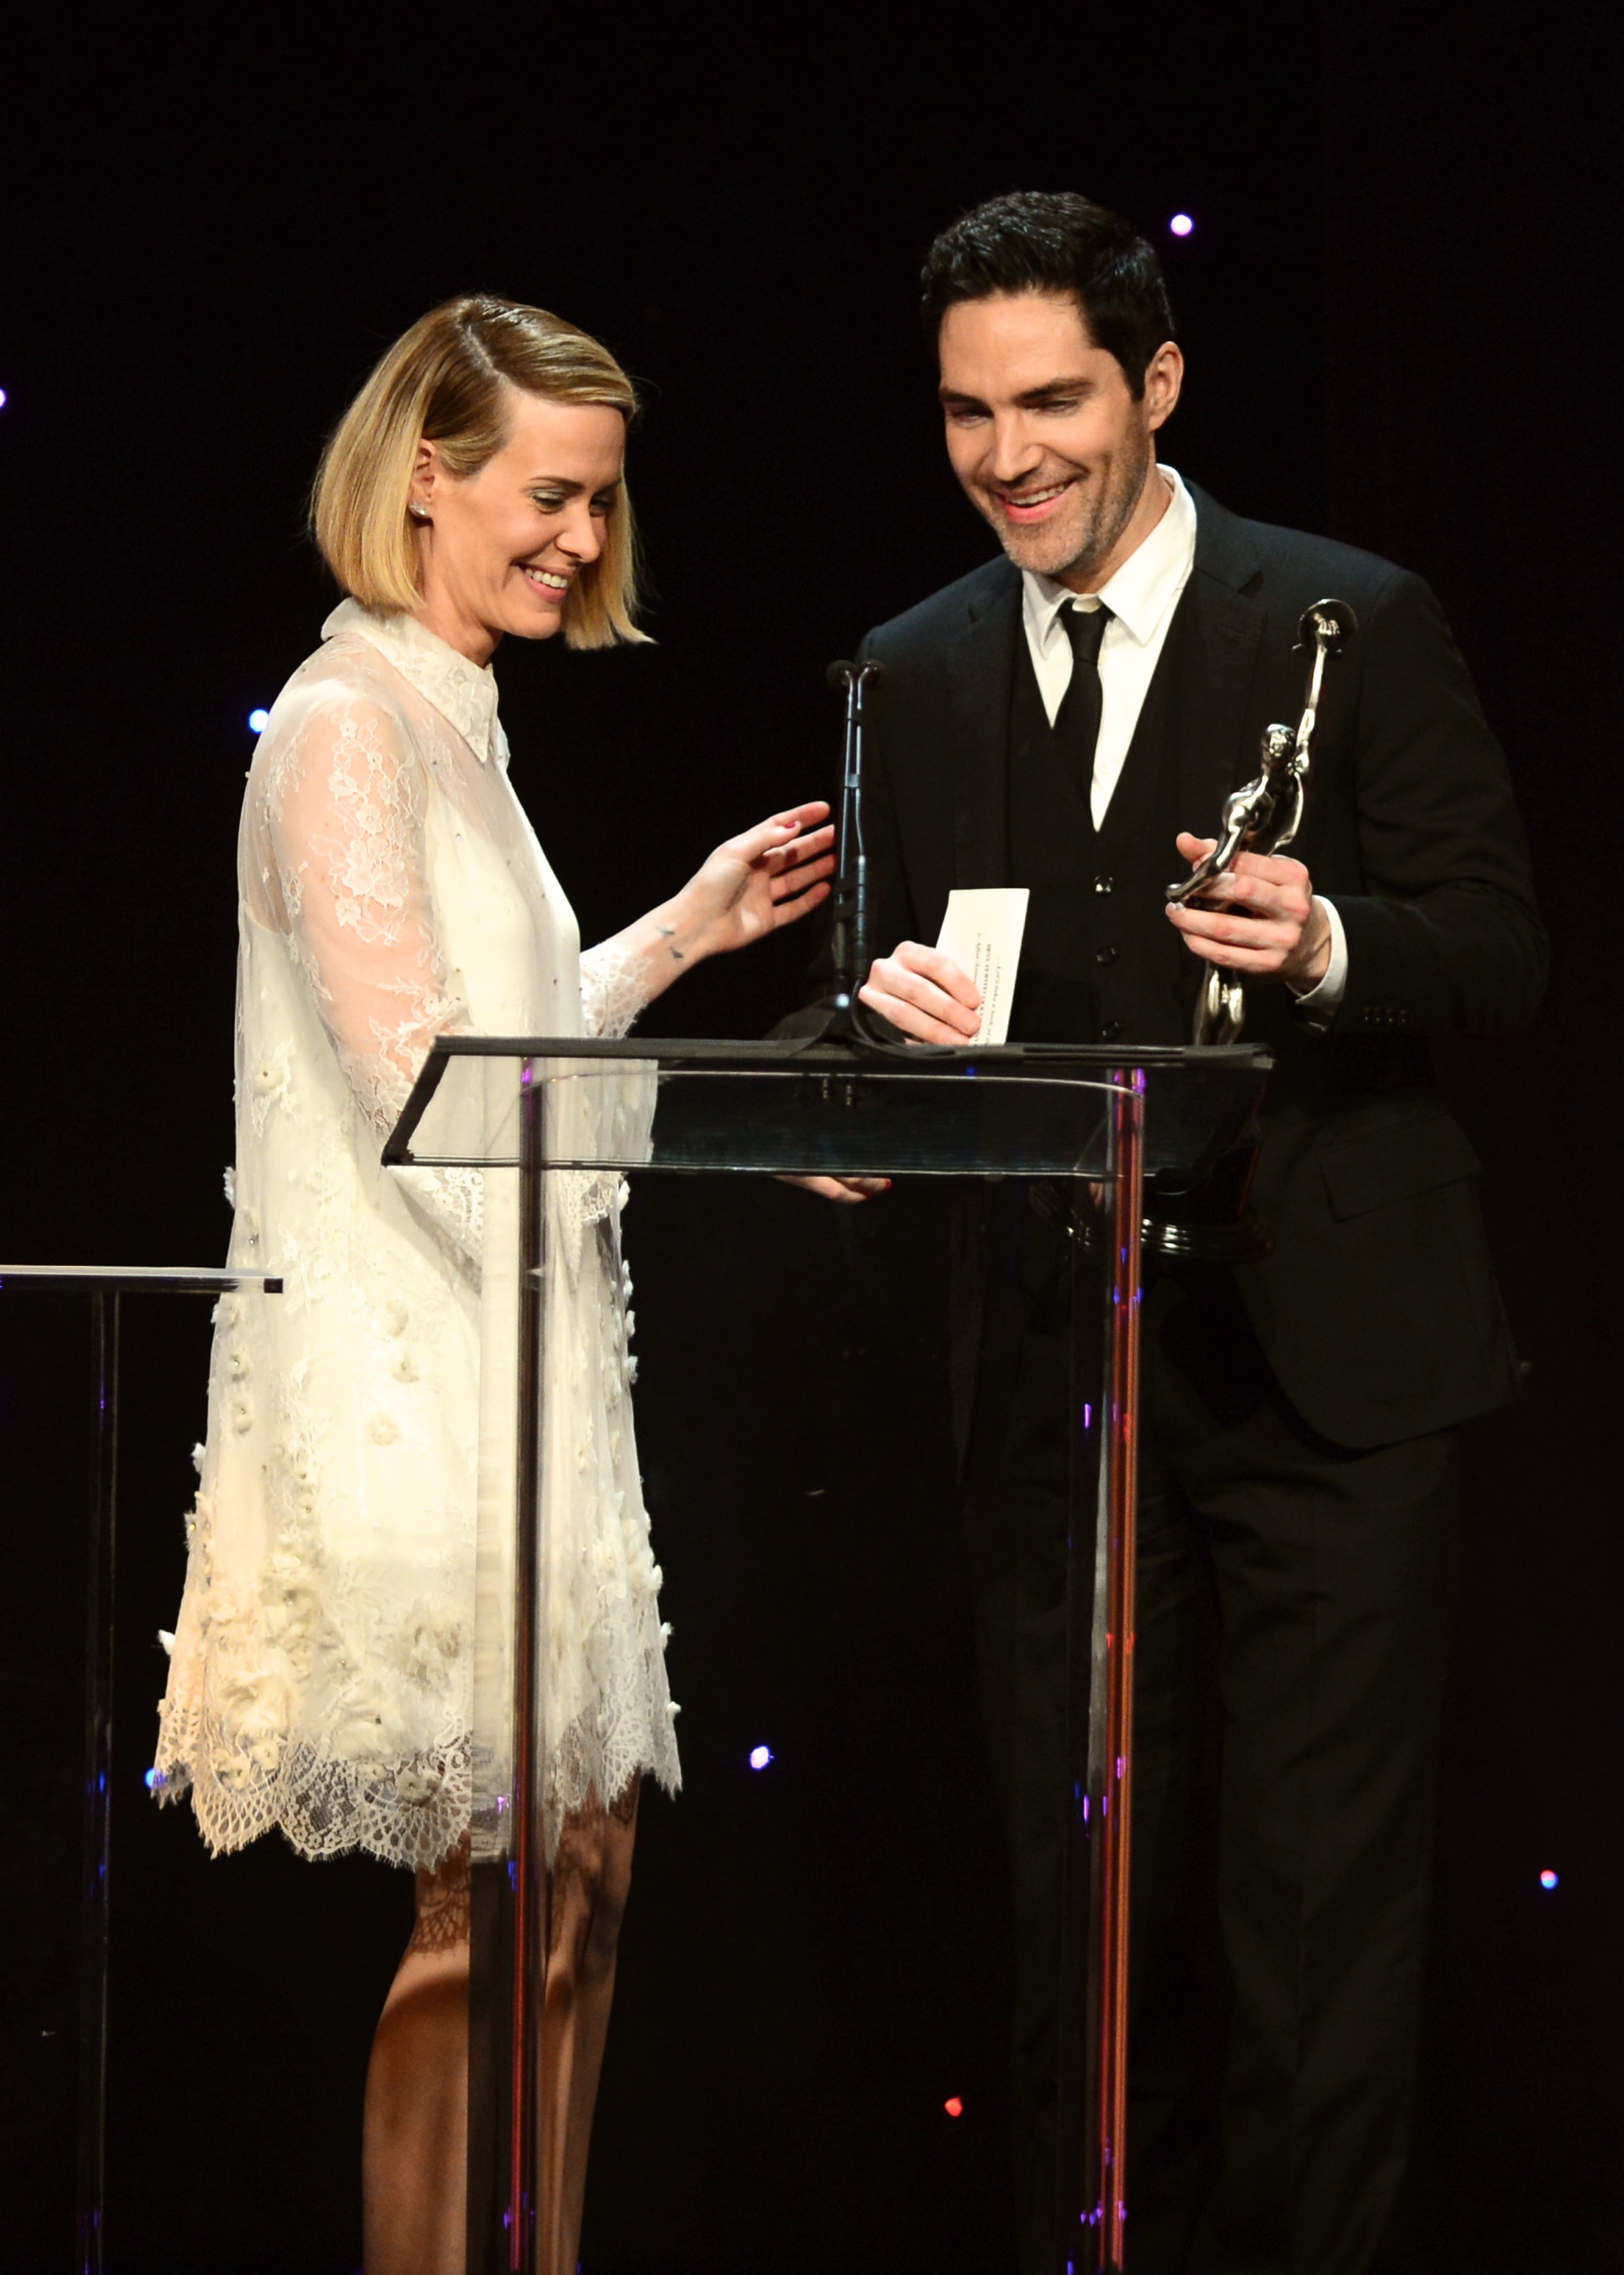 Chris A. Petersen receives his award from actress Sarah Paulson for Best Edited Documentary, 